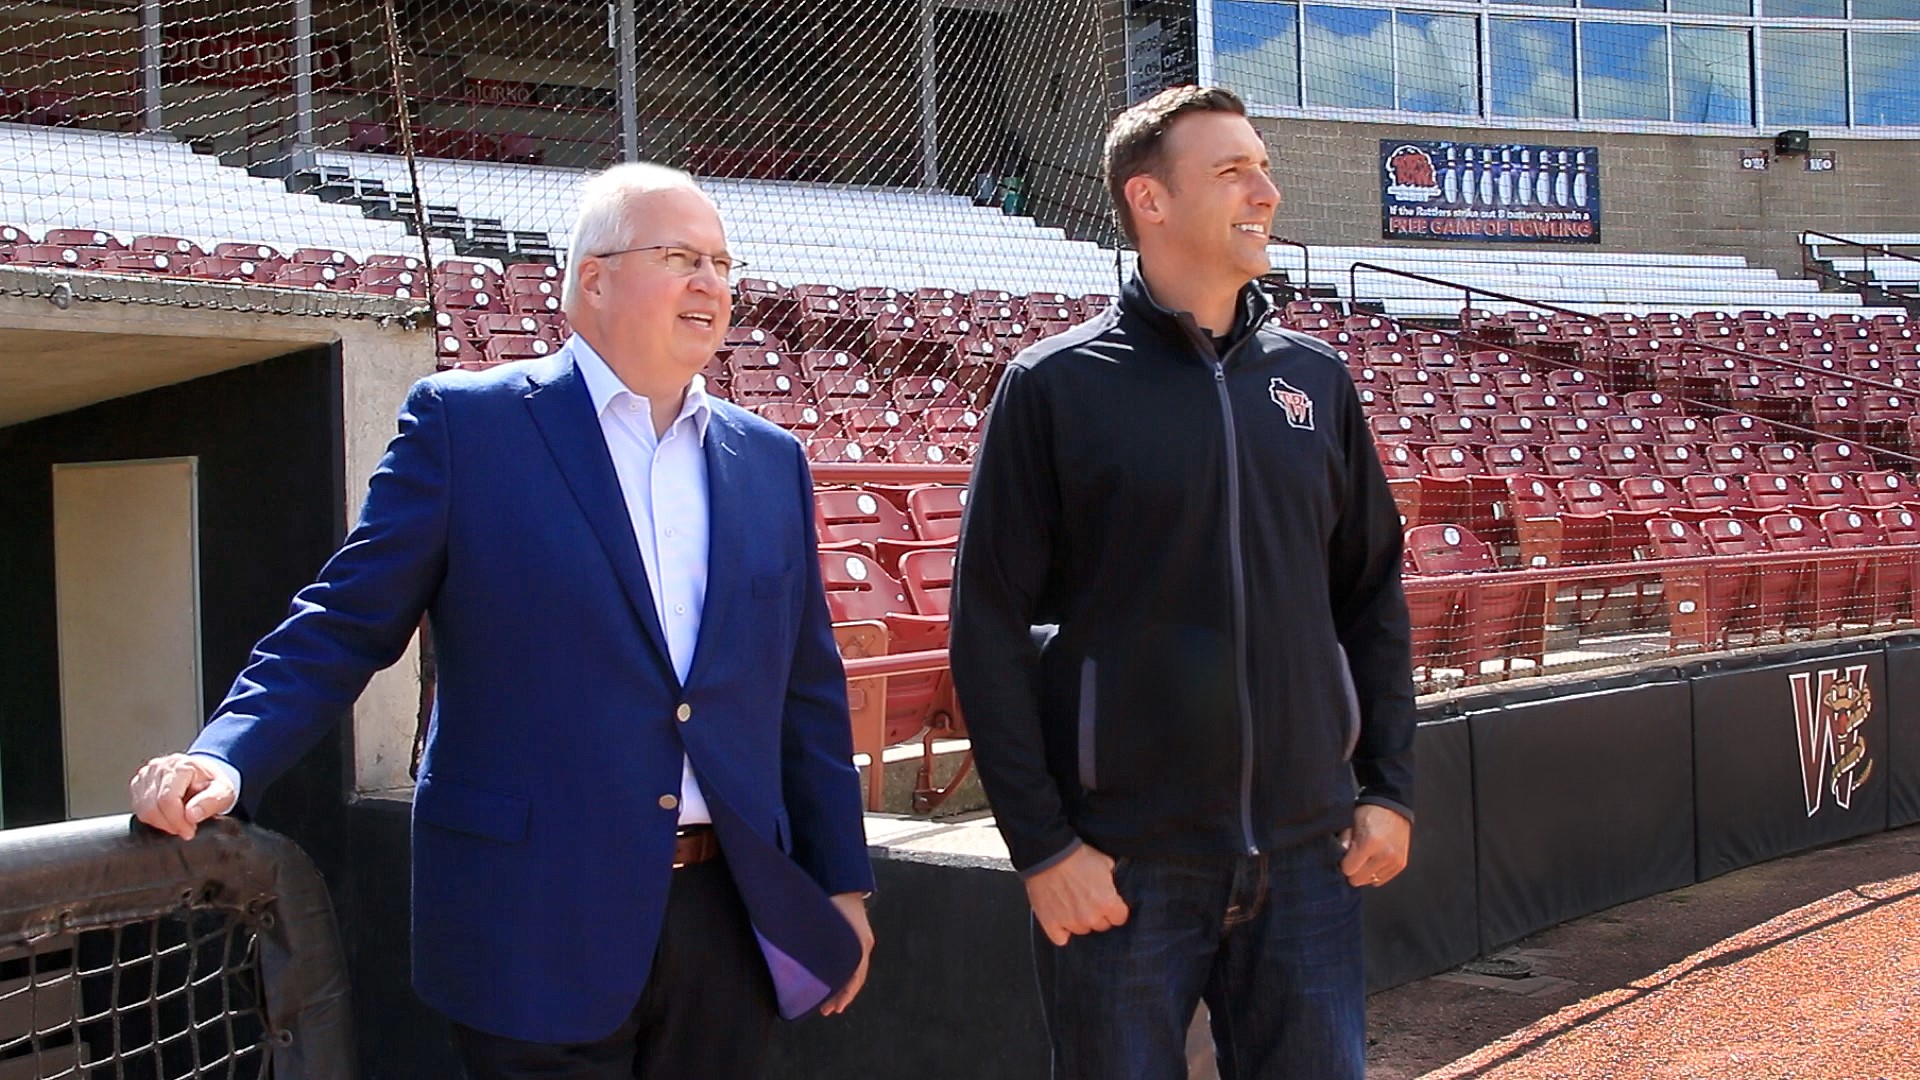 ‘Quite the honor’: Wisconsin Timber Rattlers president named minor league executive of the year